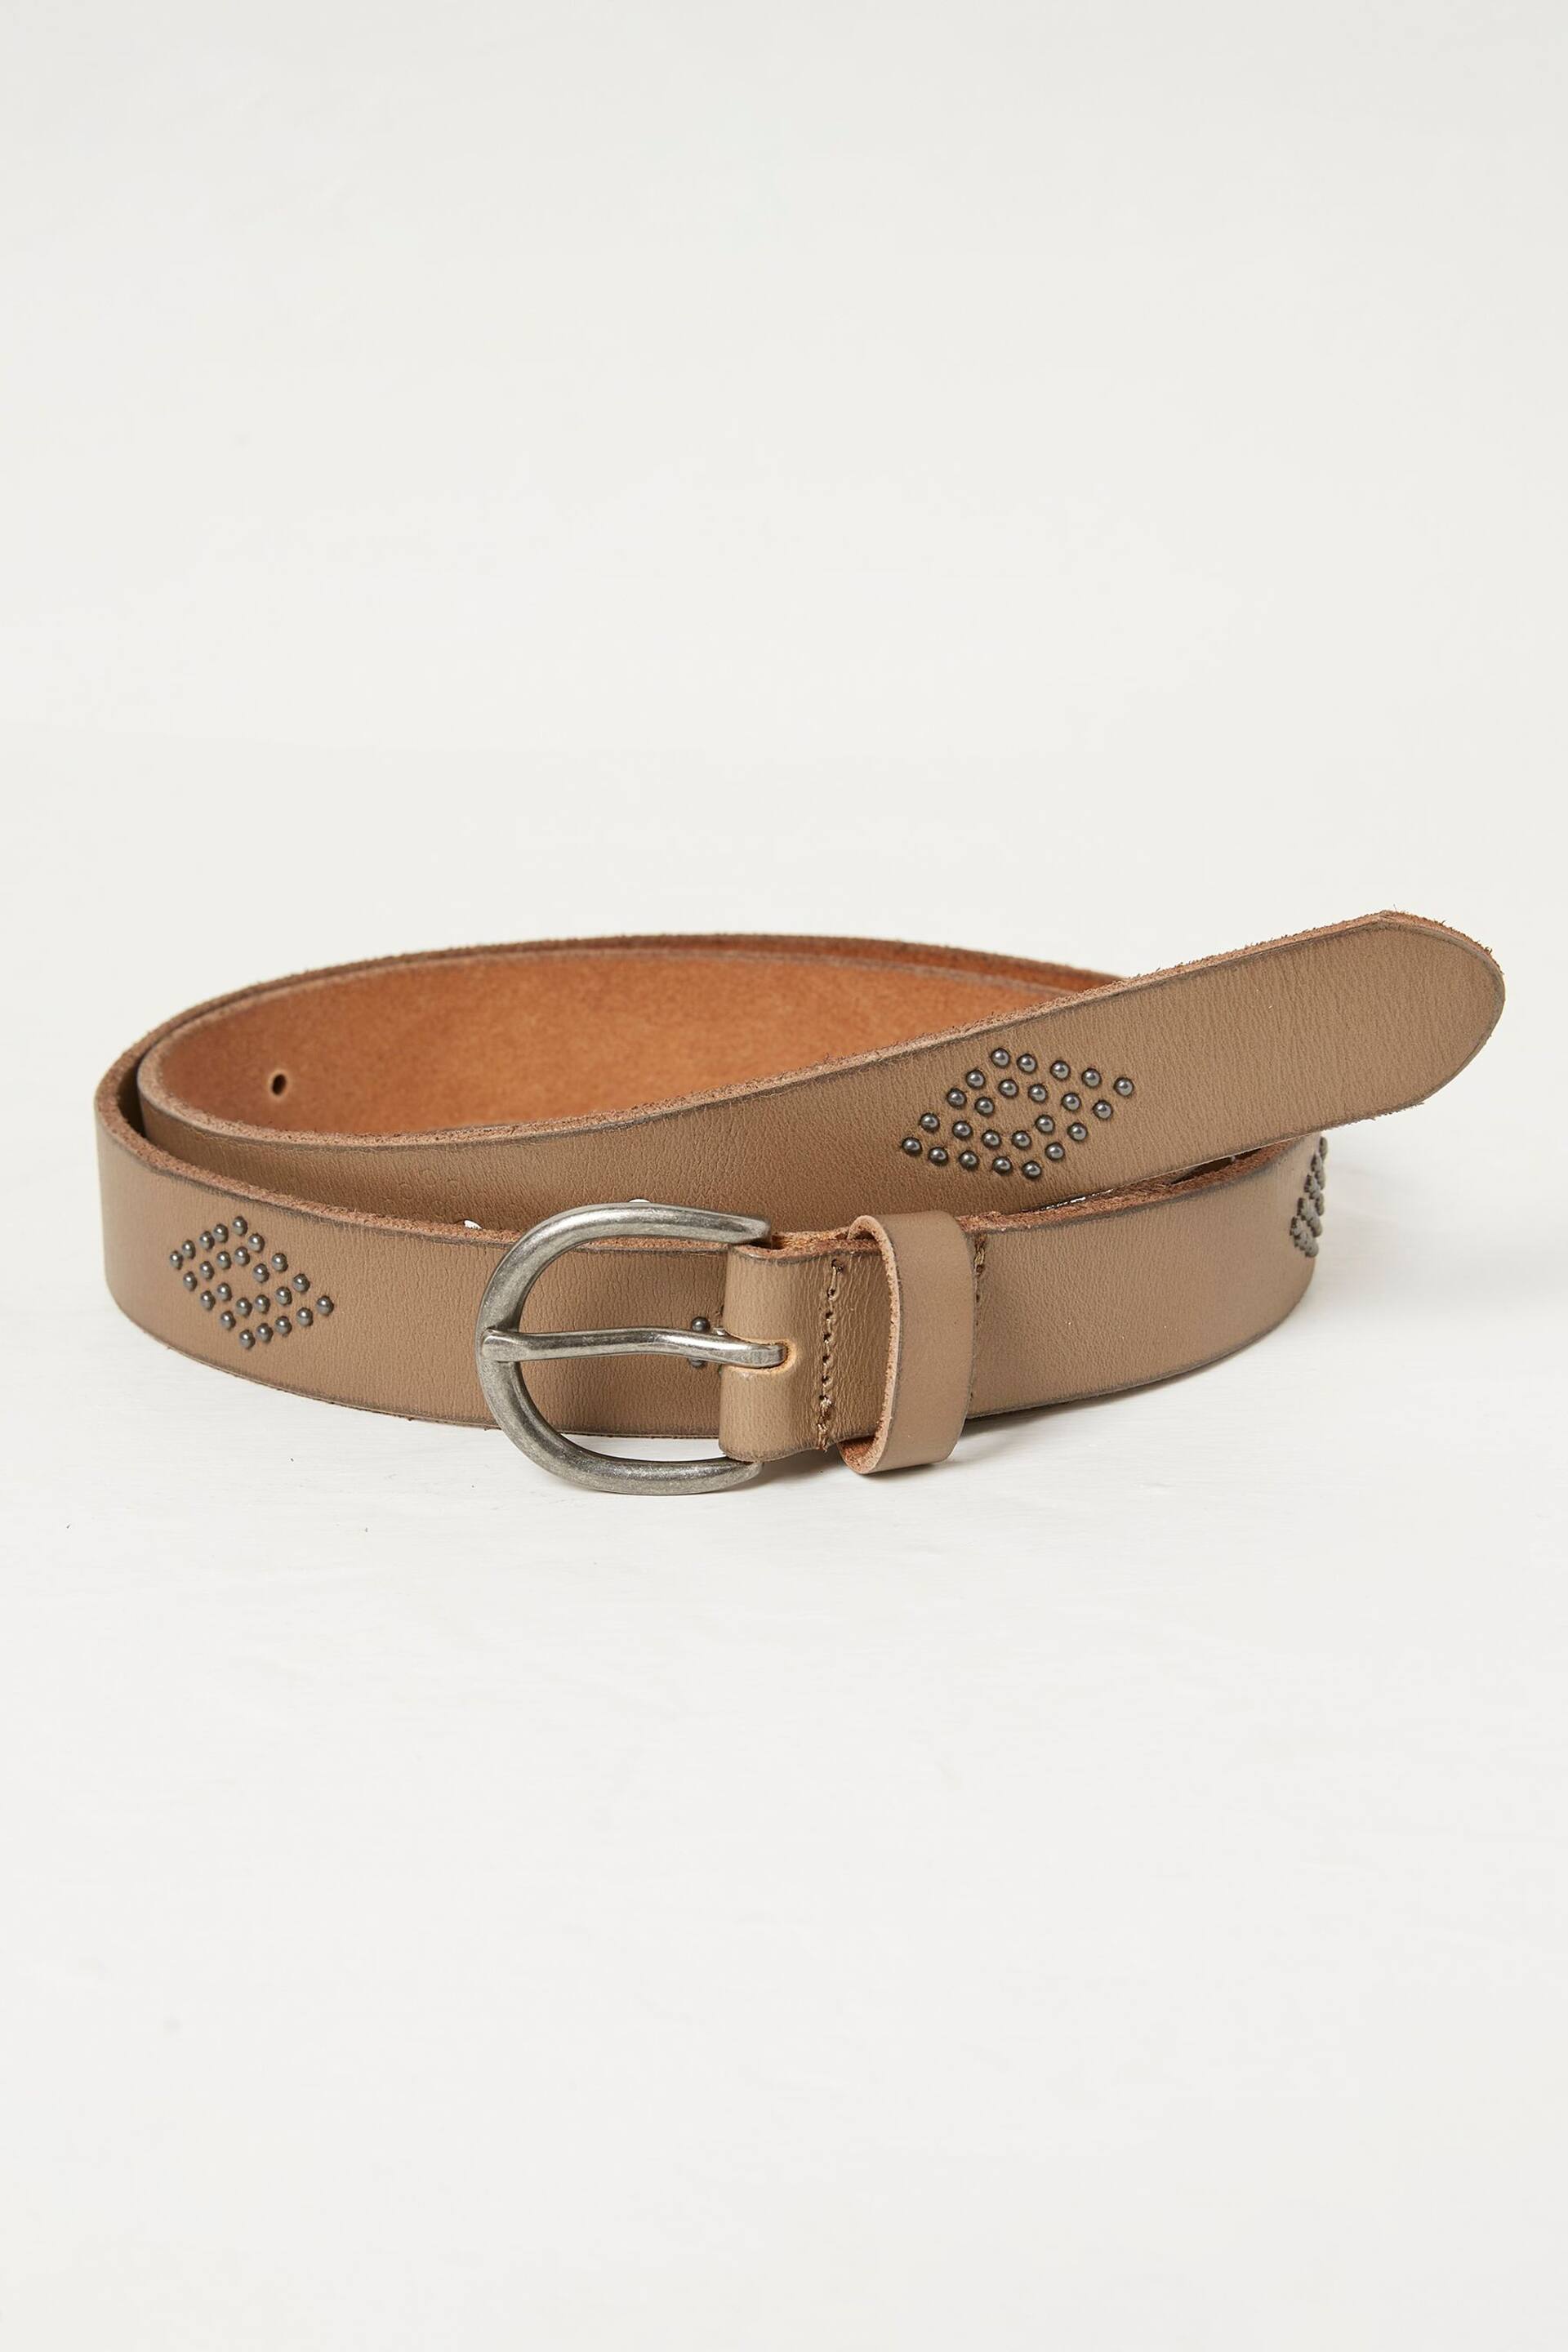 FatFace Brown Jean Stud Leather Belt - Image 1 of 2